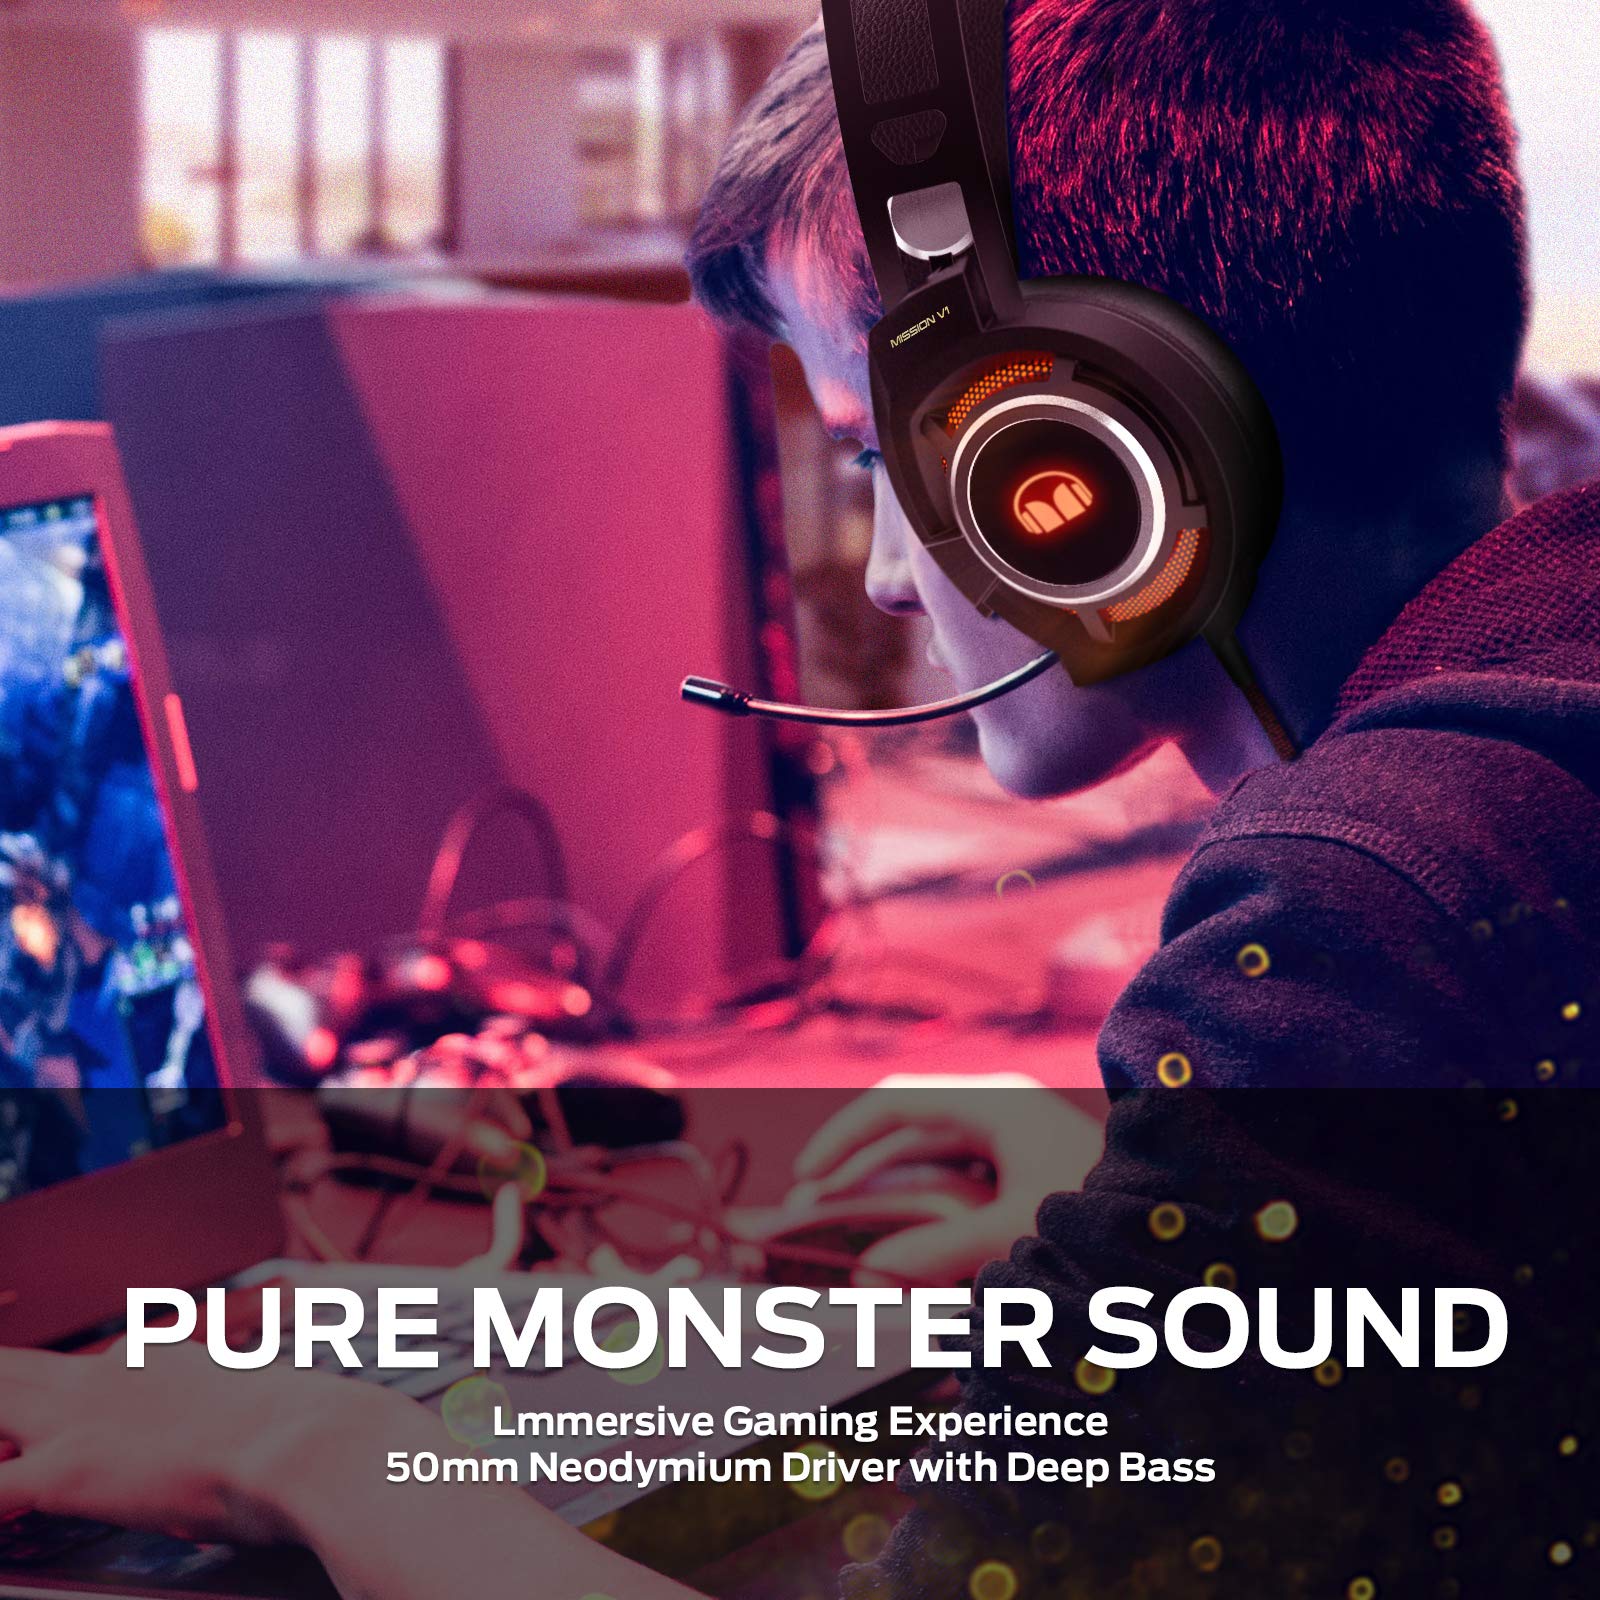 Monster Mission V1 Gaming Headset, Over-Ear Gaming Headphone with Noise Cancelling Mic, Surround Sound Stereo, Adaptive Suspension Head Beam, Colorful RGB Light, Compatible with PC/Mac/PS4/Xbox One…